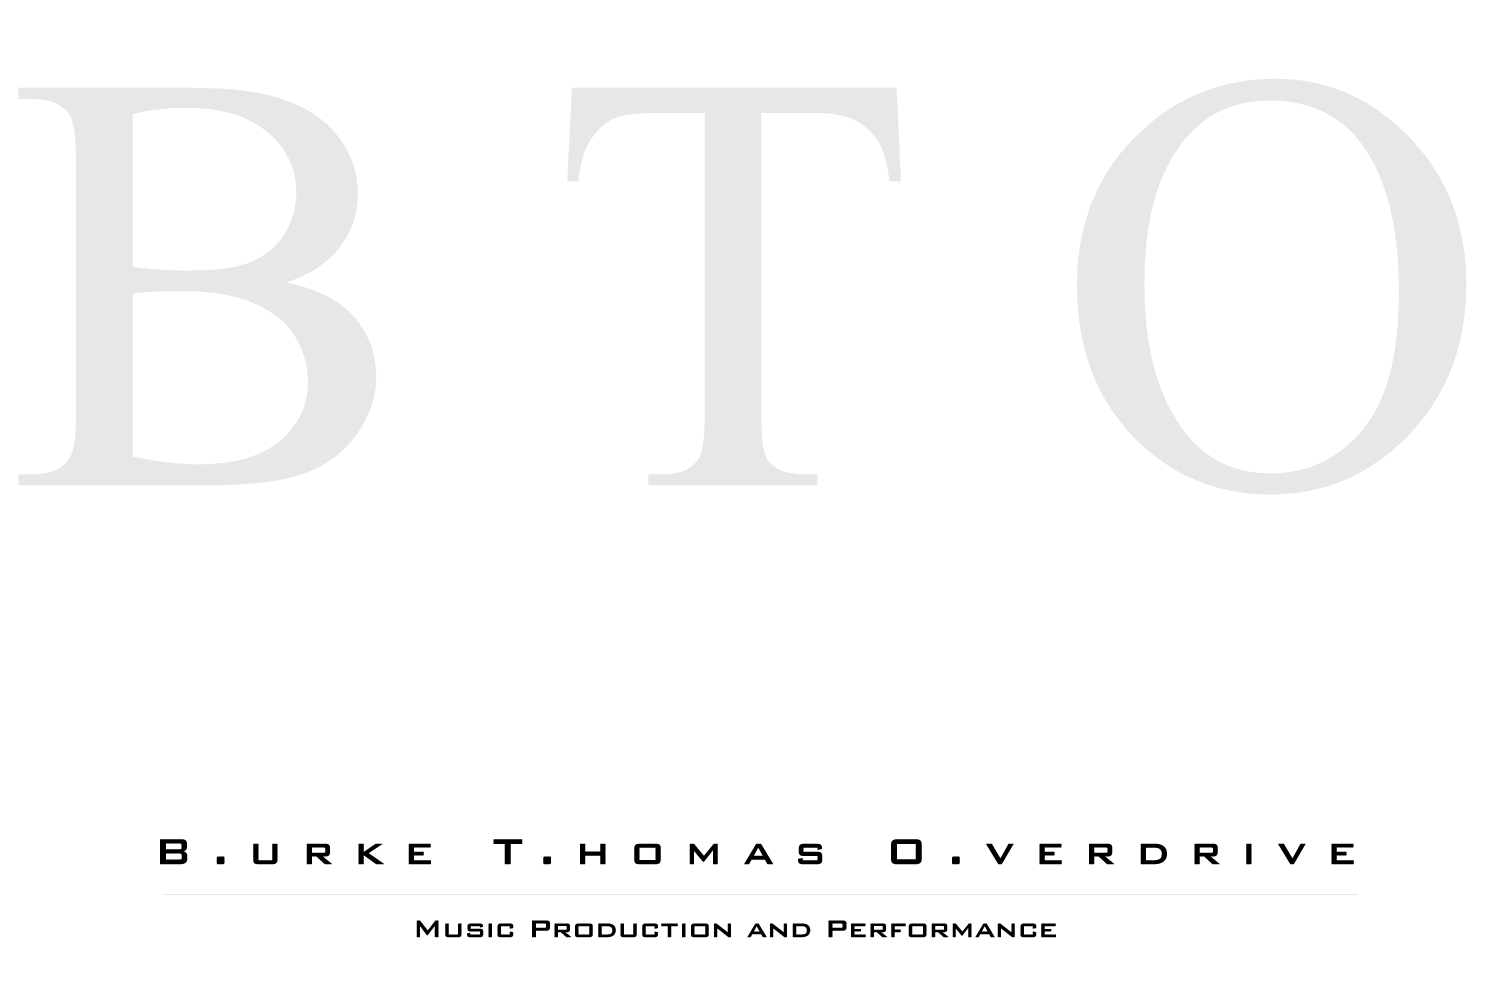 BTO - Burke Thomas Overdrive.  Drum lessons, Music Performance and Production.